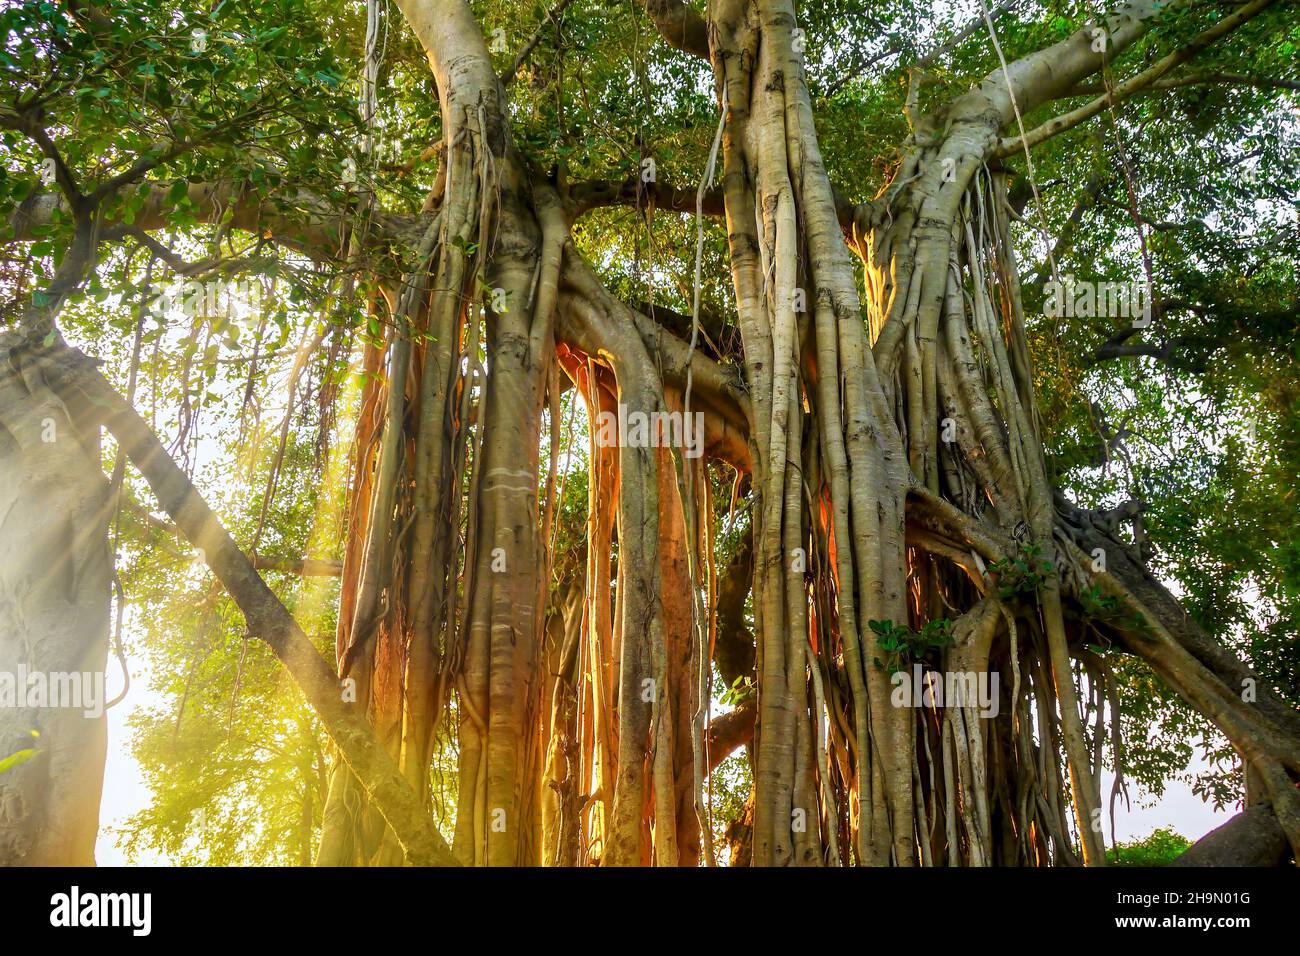 The aerial roots and branches of a strangler fig tree (Ficus) in beautiful golden light during sunset in a tropical forest in Tamil Nadu, India. Stock Photo